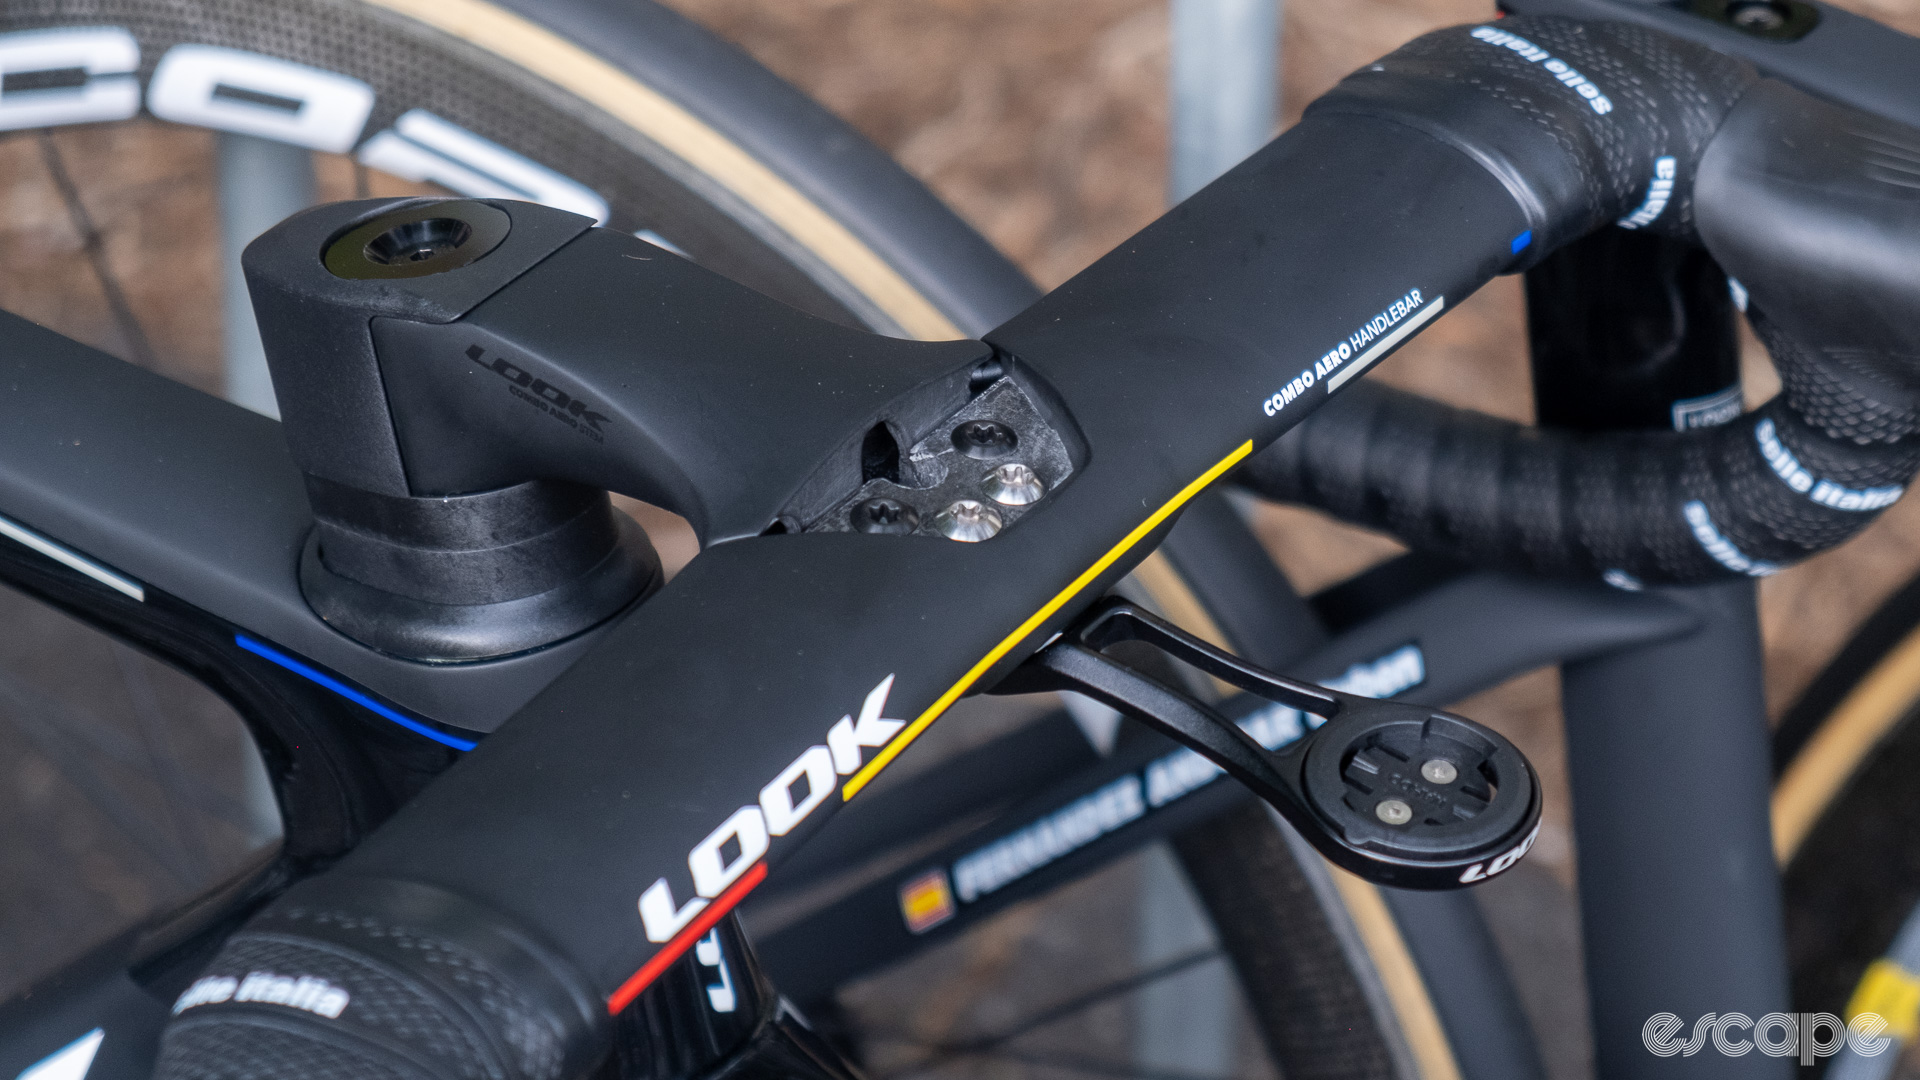 The photo shows the handlebars on a Team Cofidis' Look 795 Blade RS missing its top cap.